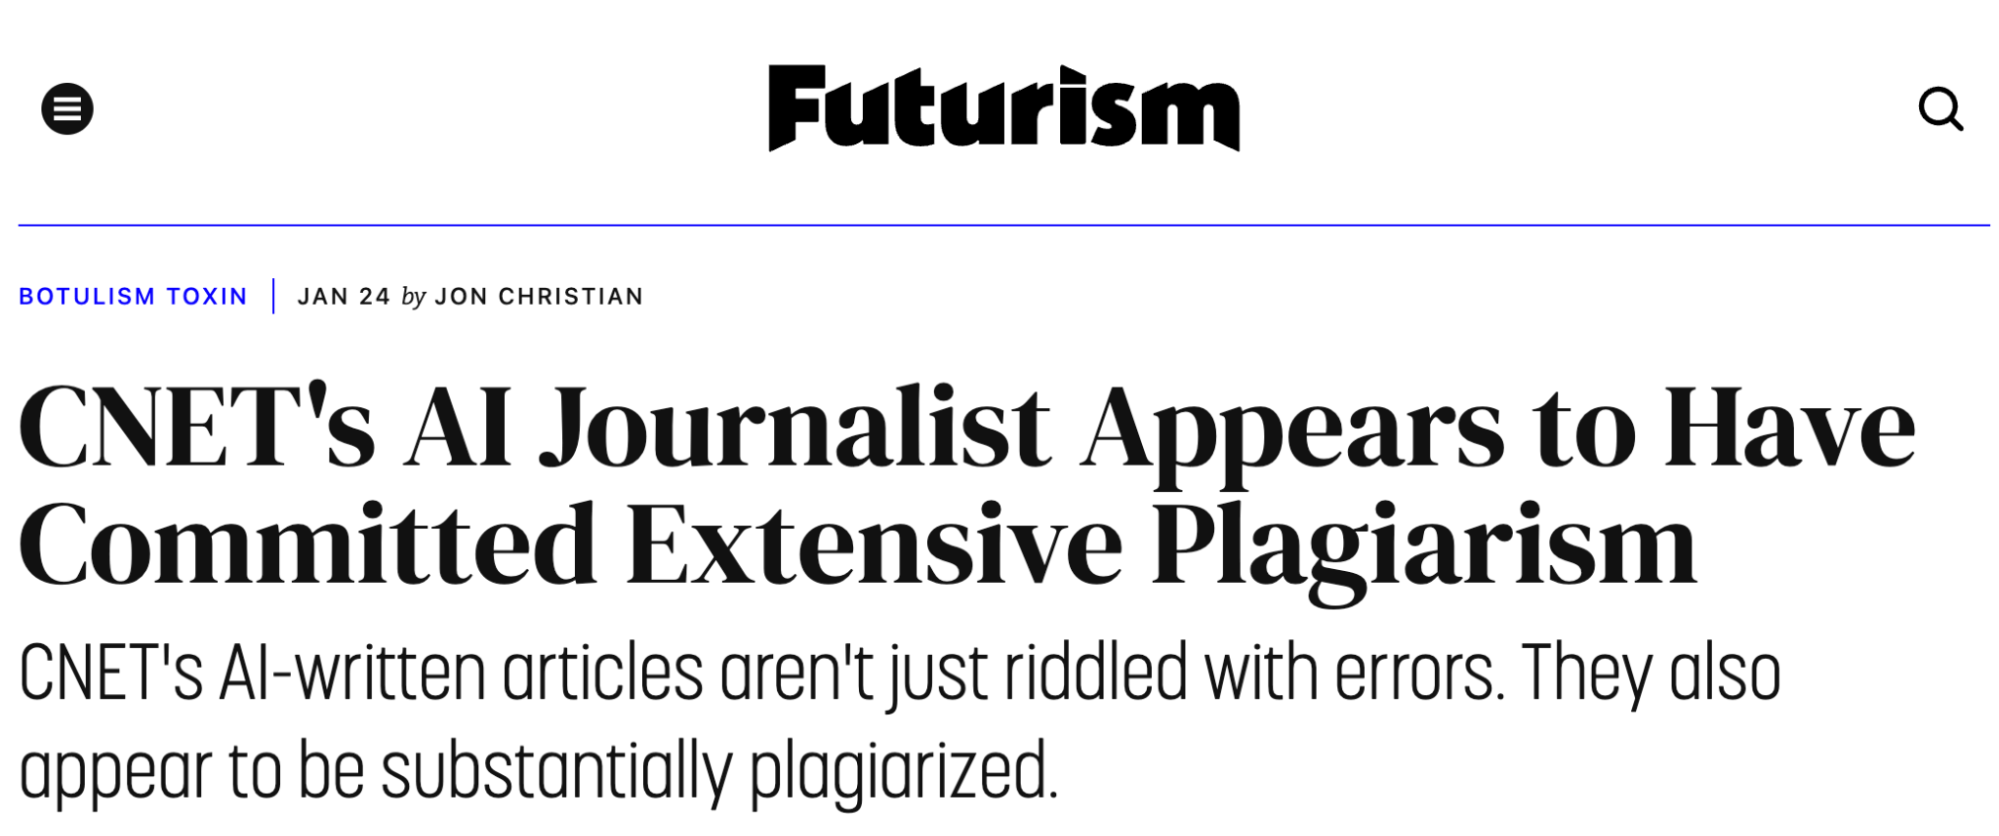 A Futurism article on CNET's AI journalist committing plagiarism